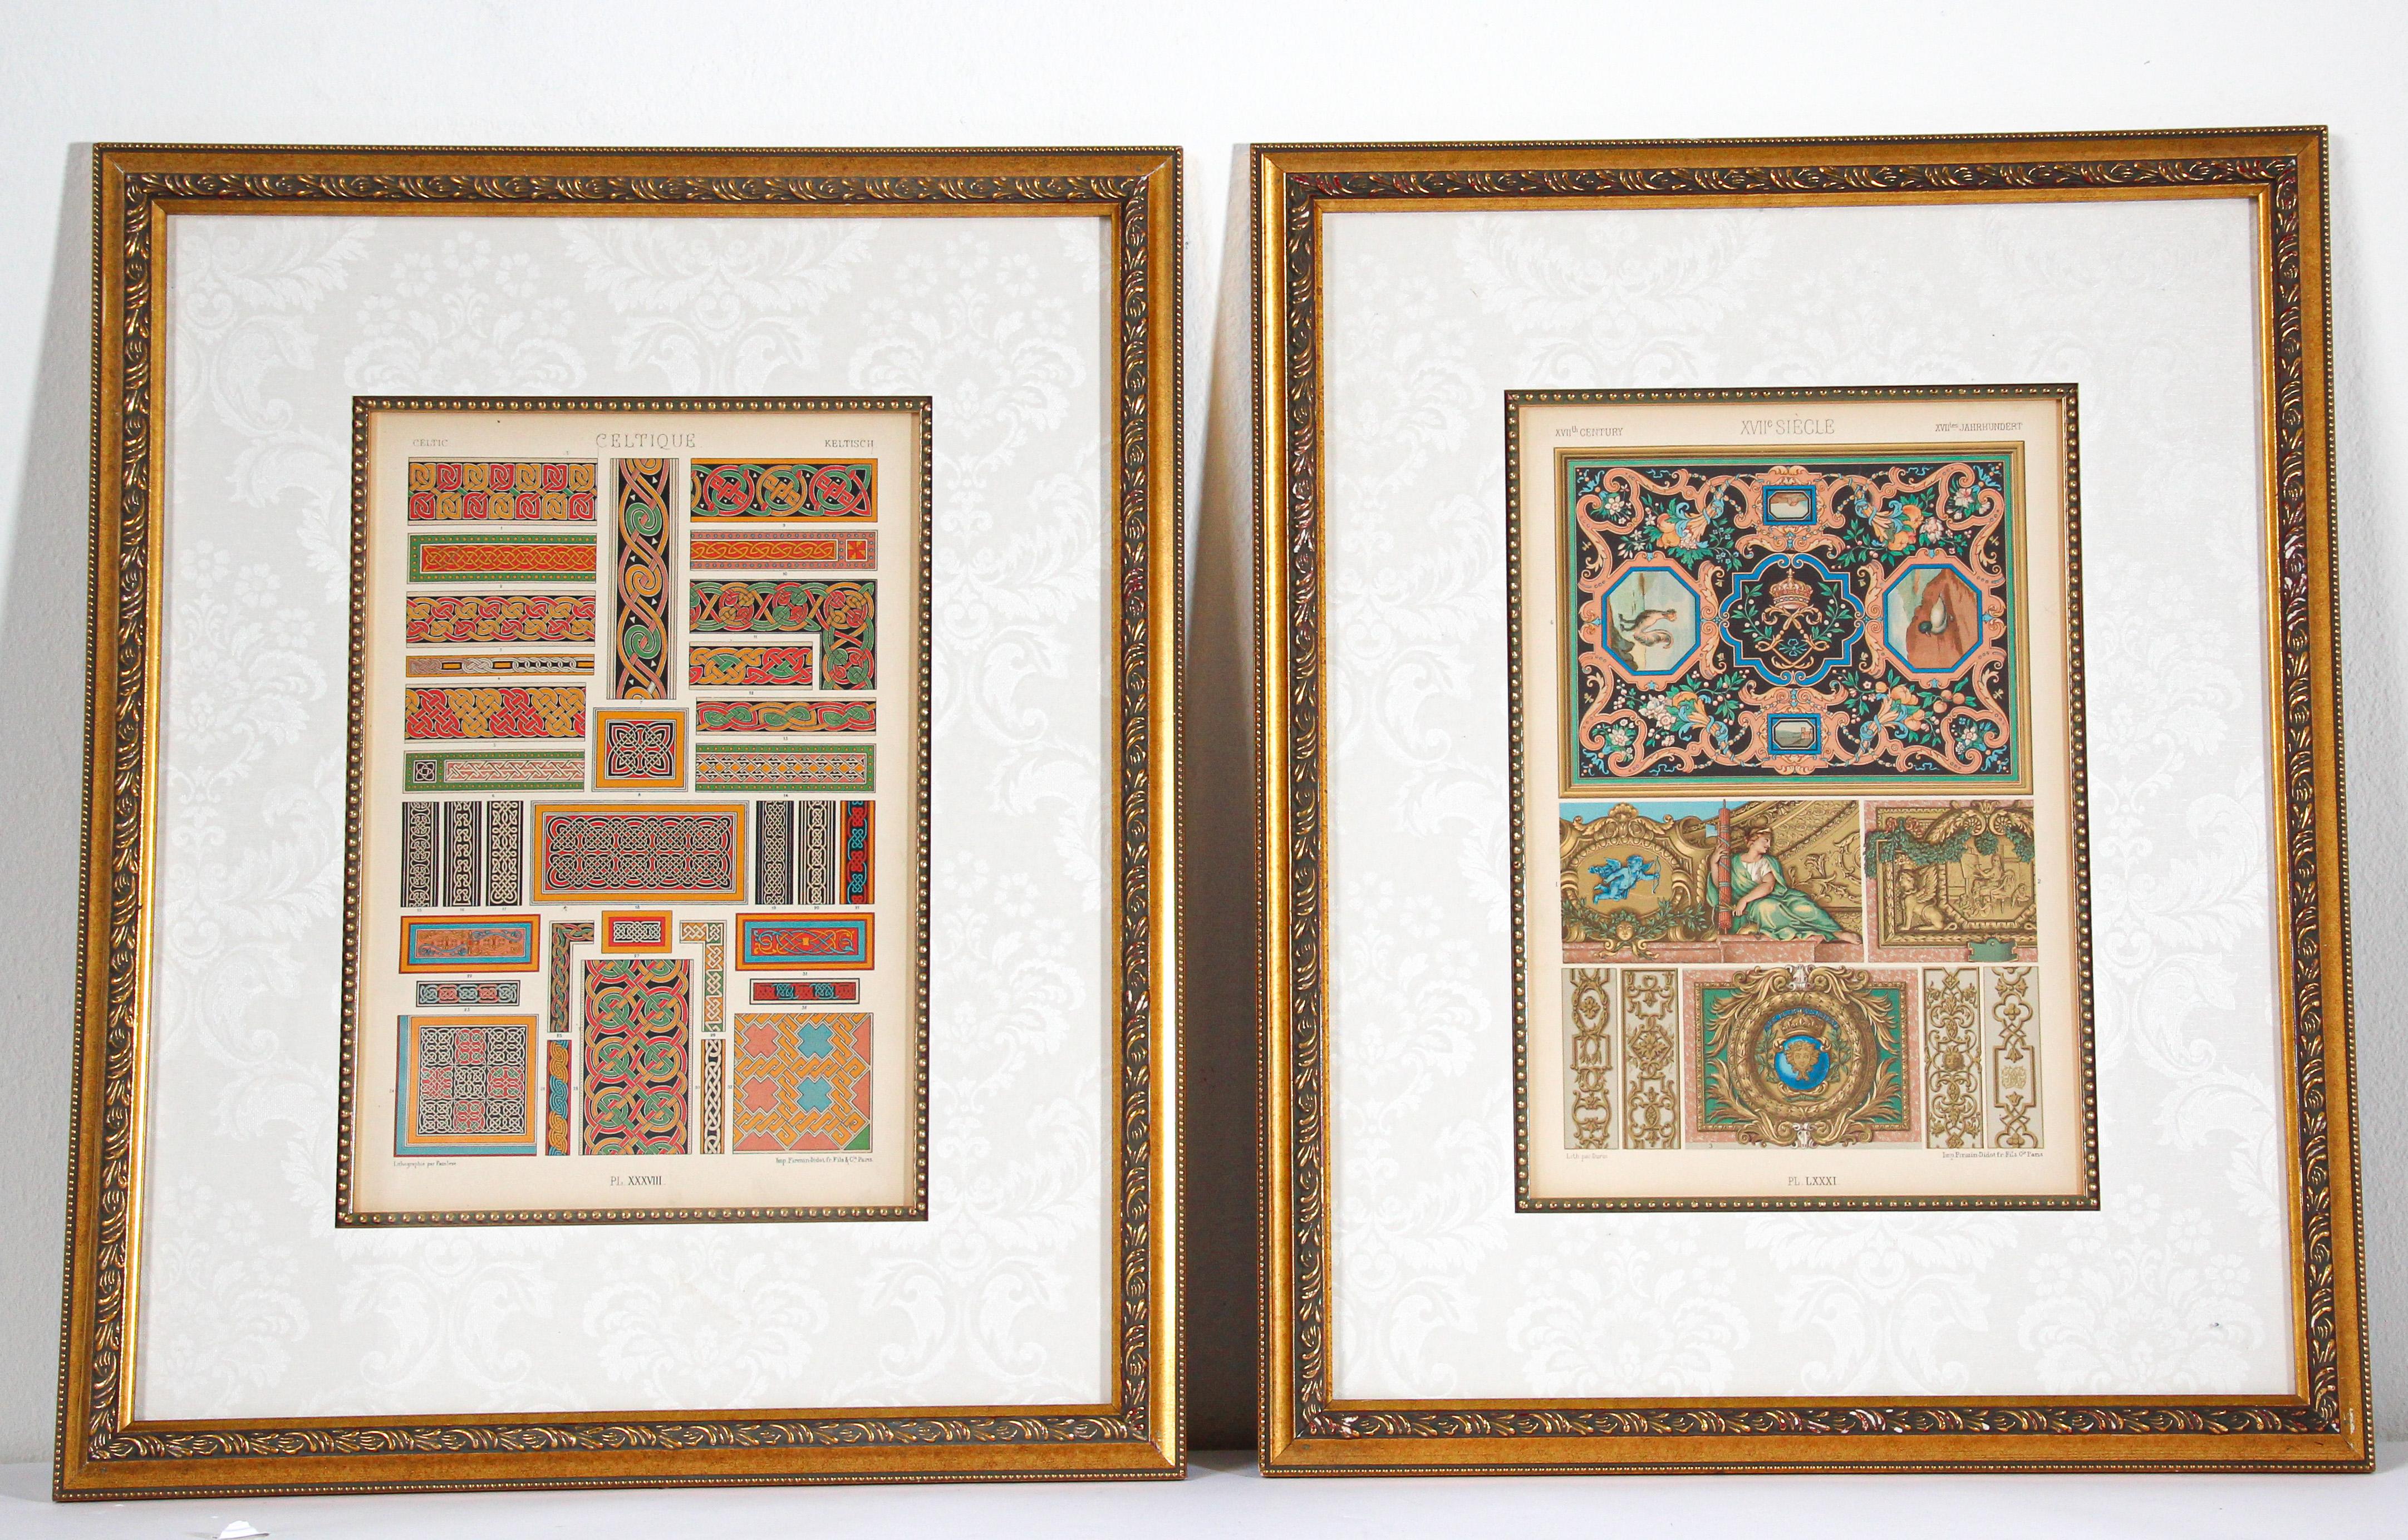 Antique print of 17th century pattern interior decor by Racinet, circa 1890 from L'ornement Polychrome (1888) by Albert Racinet (1825–1893).
After the Antique print titled '17th Century - XVIIc Siècle - XVII, Les Jahrhundert'. Chromolithograph of